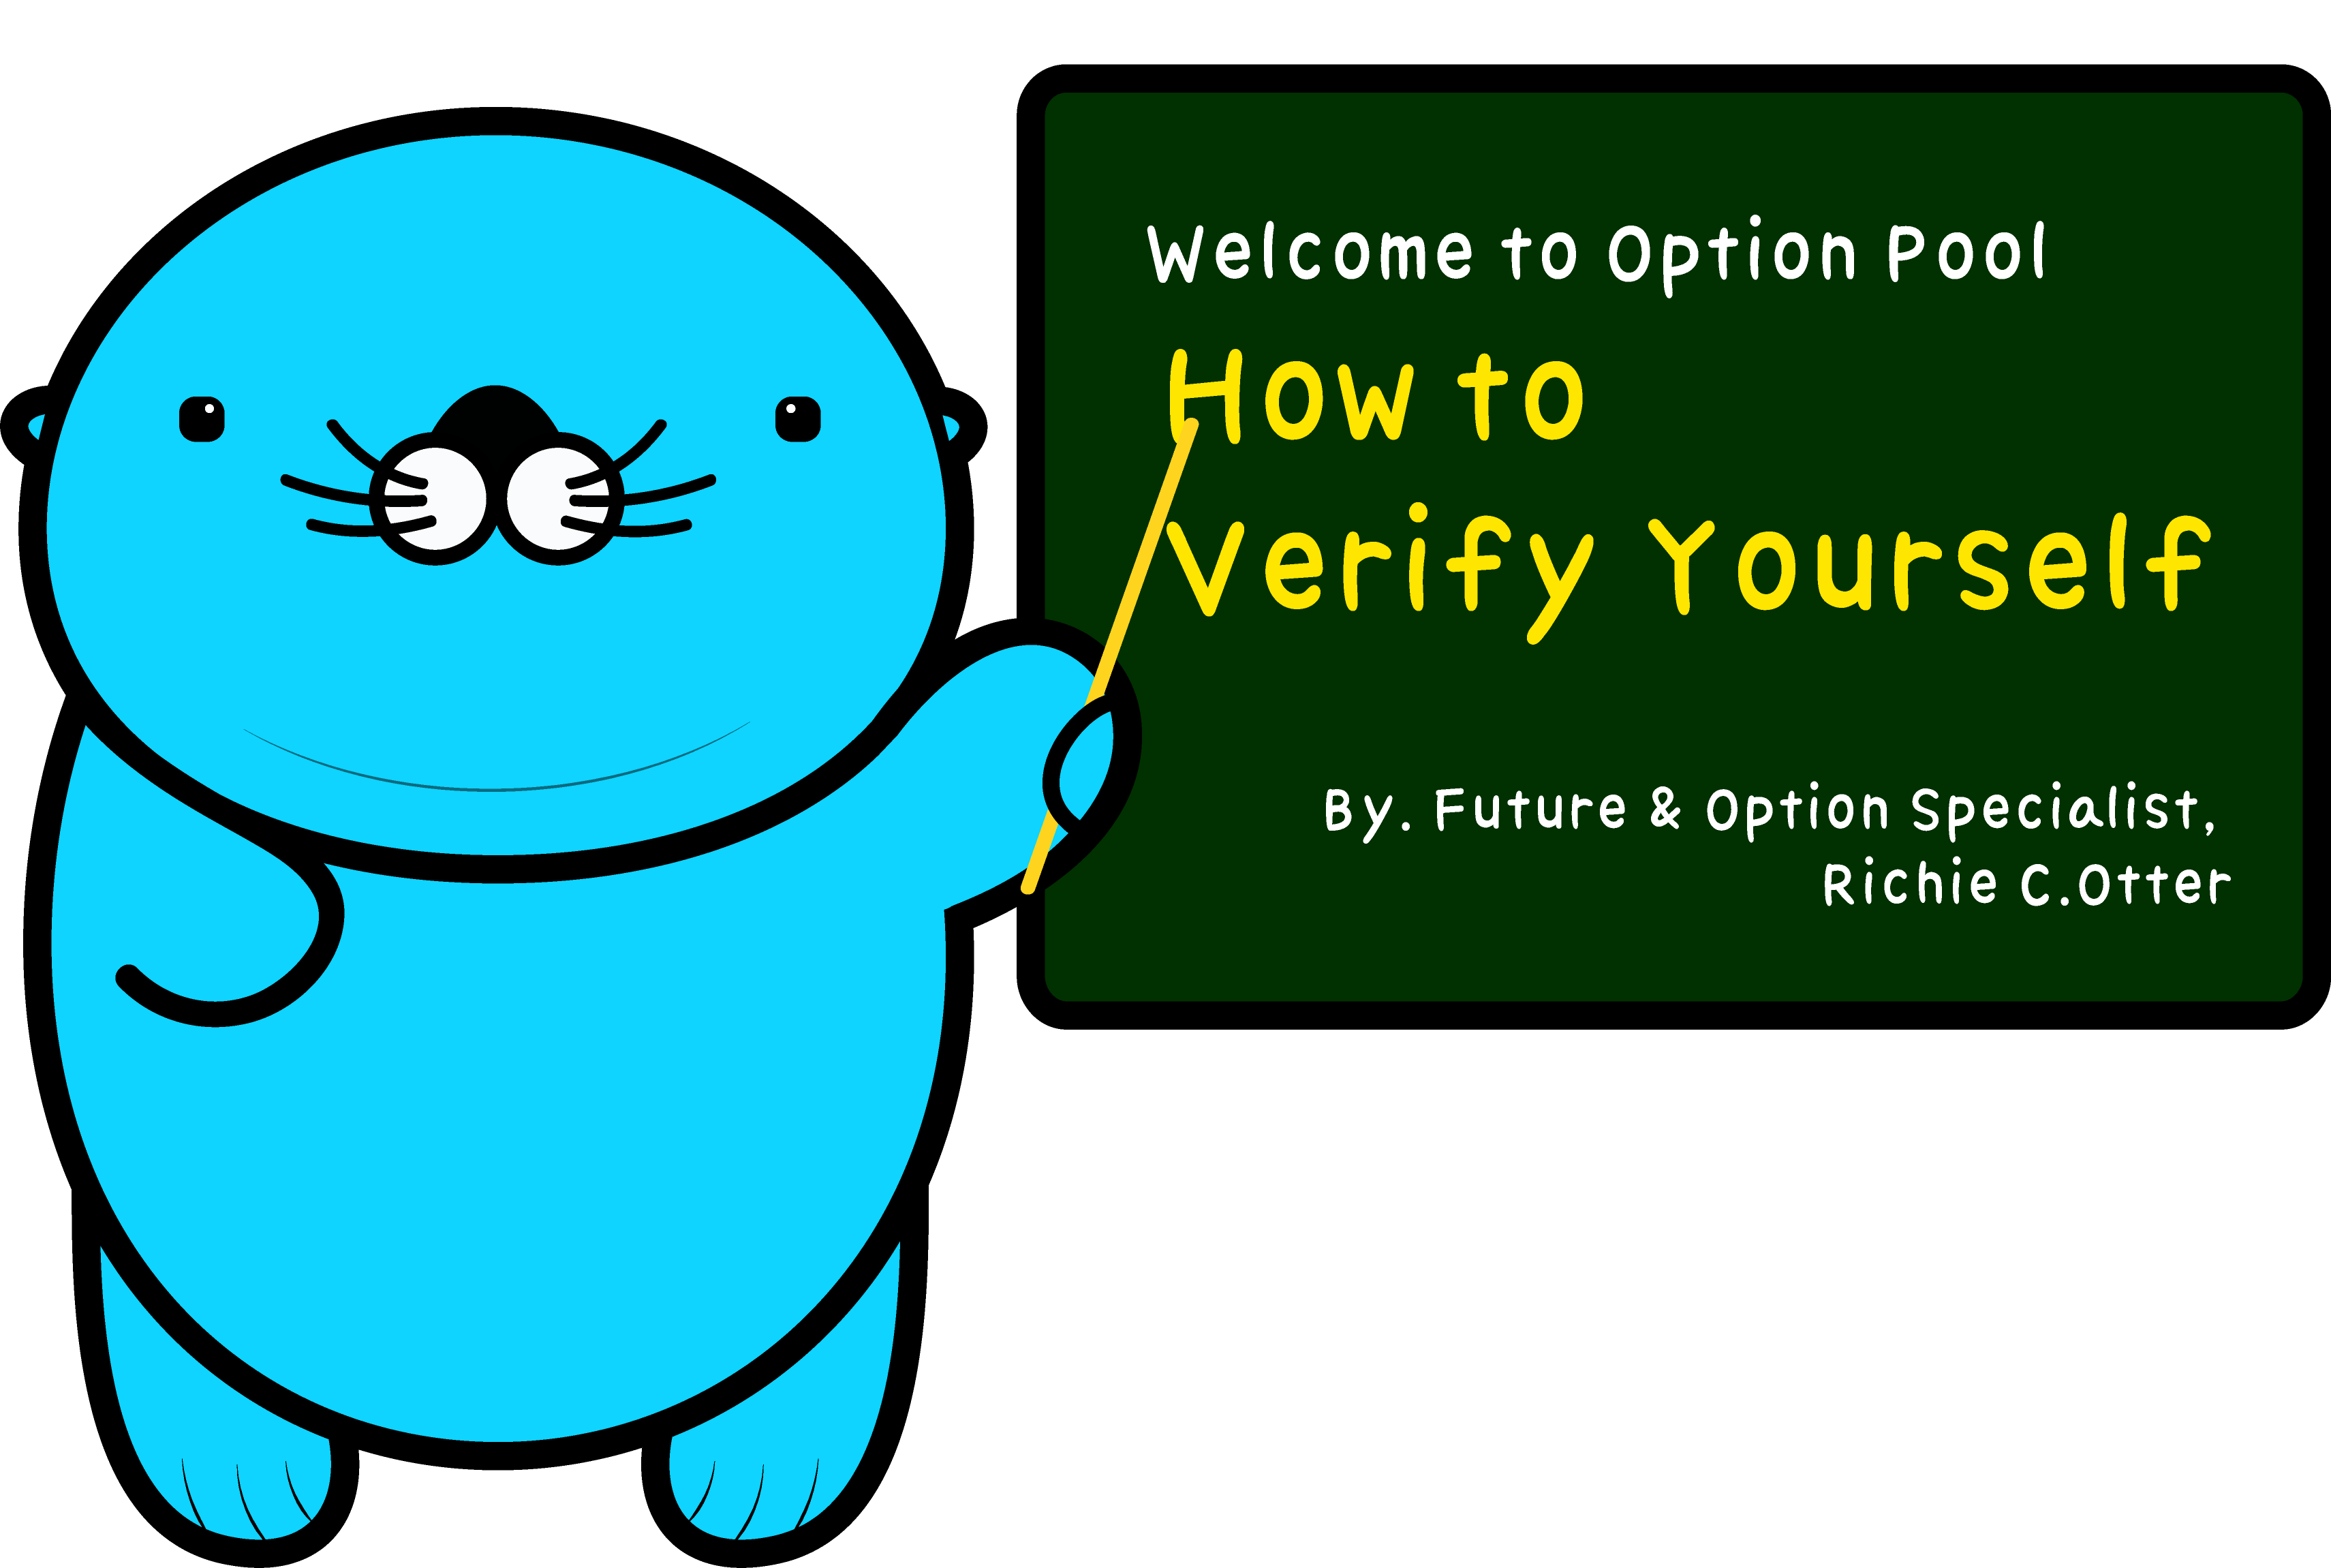 Richie, the mascot of Option Pool, the Bitcoin futures and options exchange, is instructing how to verify user's account